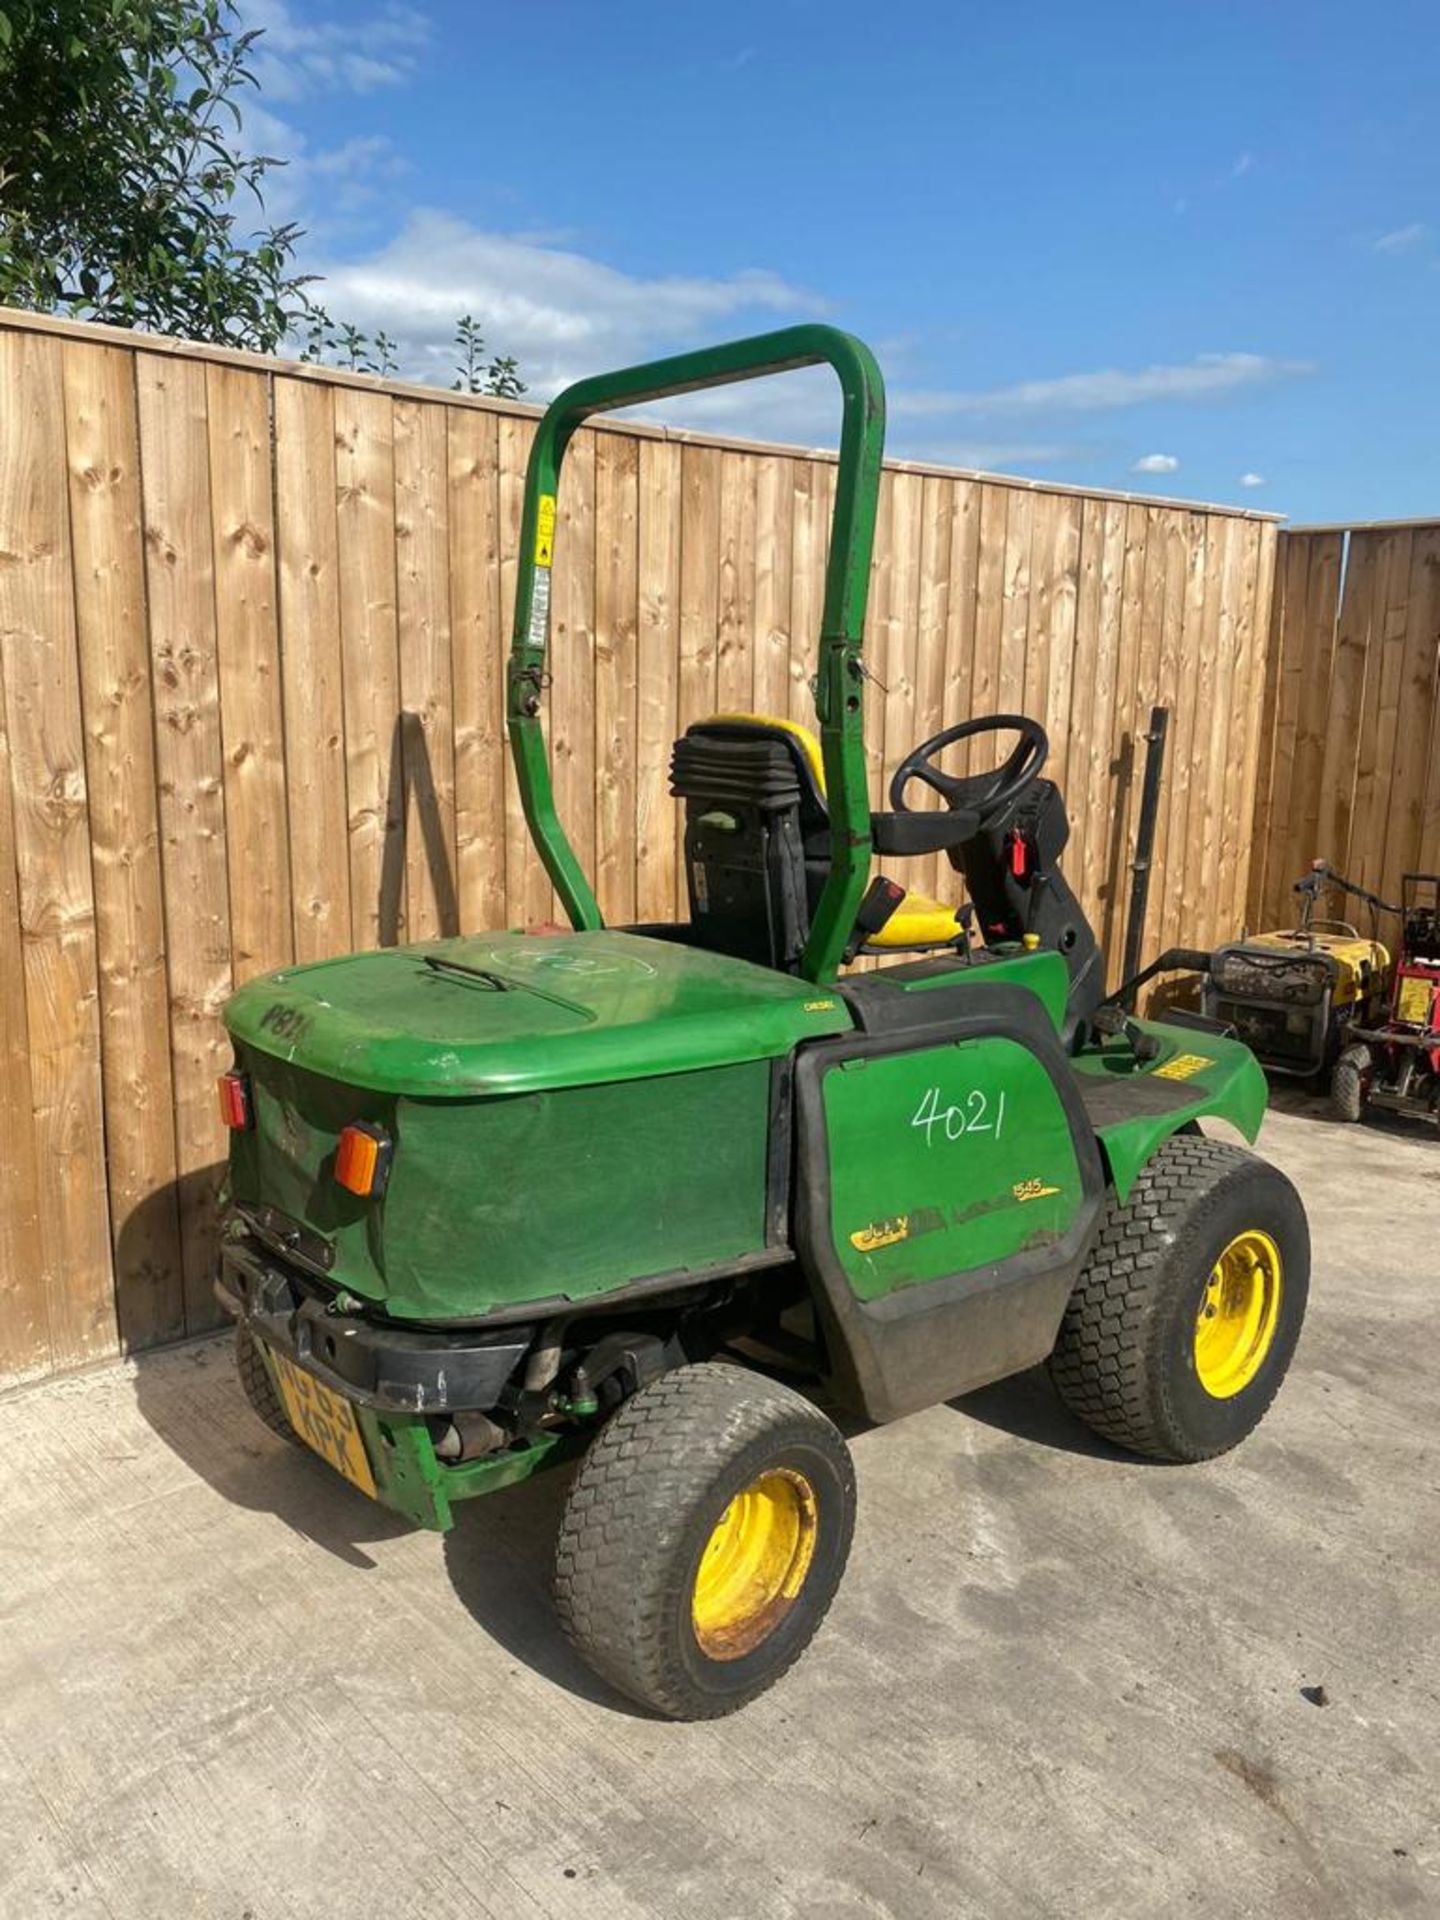 2013 "63" JOHN DEERE 1545 OUTFRONT MOWER LOCATION: NORTH YORKSHIRE